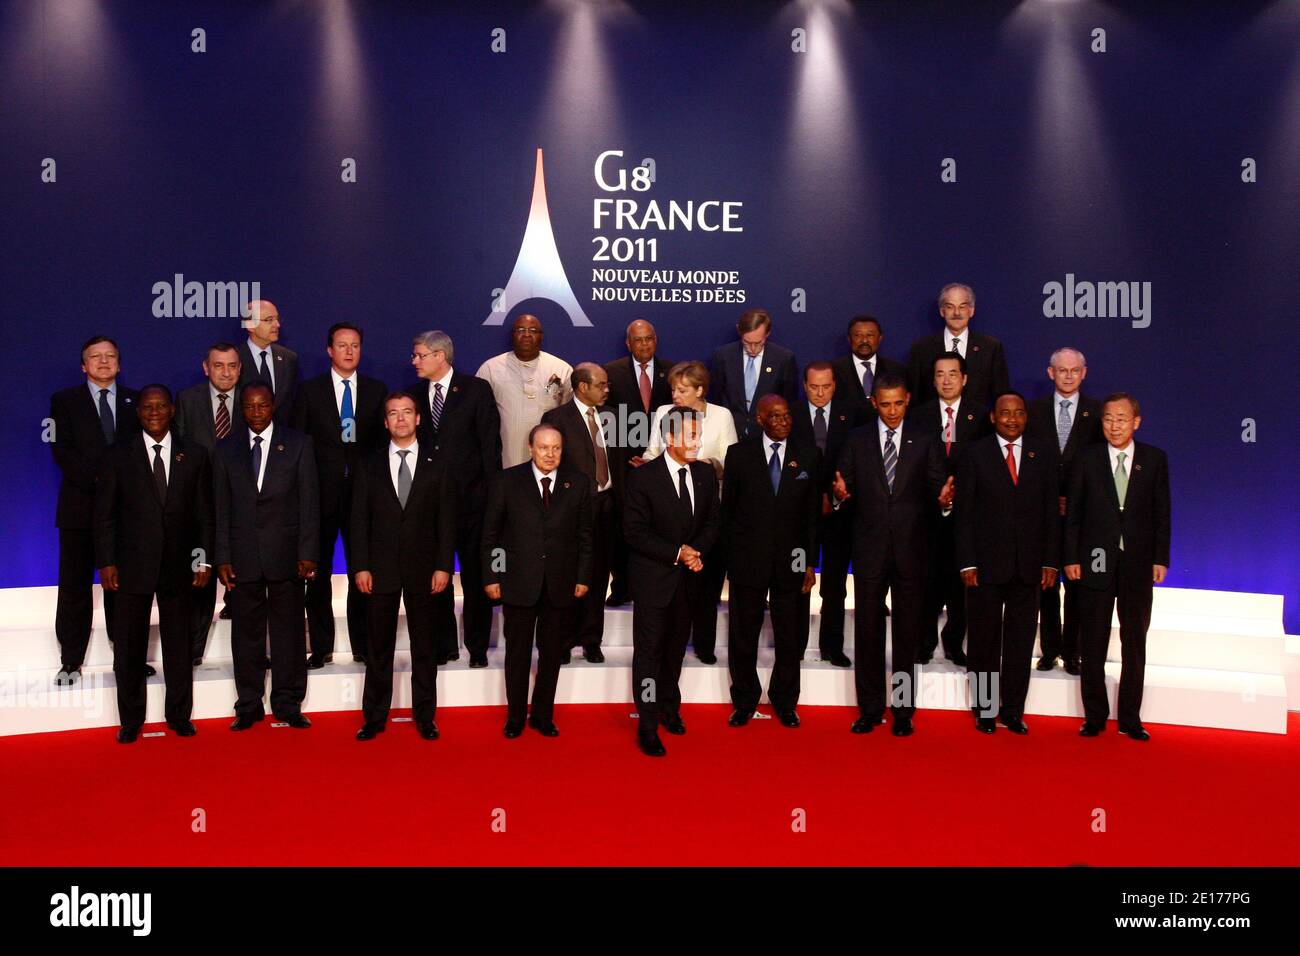 First row from L) Ivory Coast's President Alassane Ouattara, Guinean President Alpha Conde, Russian President Dmitry Medvedev, Algerian President Abdelaziz Bouteflika, French President Nicolas Sarkozy, Senegalese President Abdoulaye Wade, US President Barack Obama, Niger's President Mahamadou Issoufou and UN General Secretary Ban Ki-Moon, (second row from L) Jose Manuel Barroso, Head of the European Commission, Egyptian Prime Minister Essam Sharaf, British Prime Minister David Cameron and Canadian Prime Minister Stephen Harper, Ethiopia's Prime Minister Meles Zenawi, German Chancellor Angela M Stock Photo